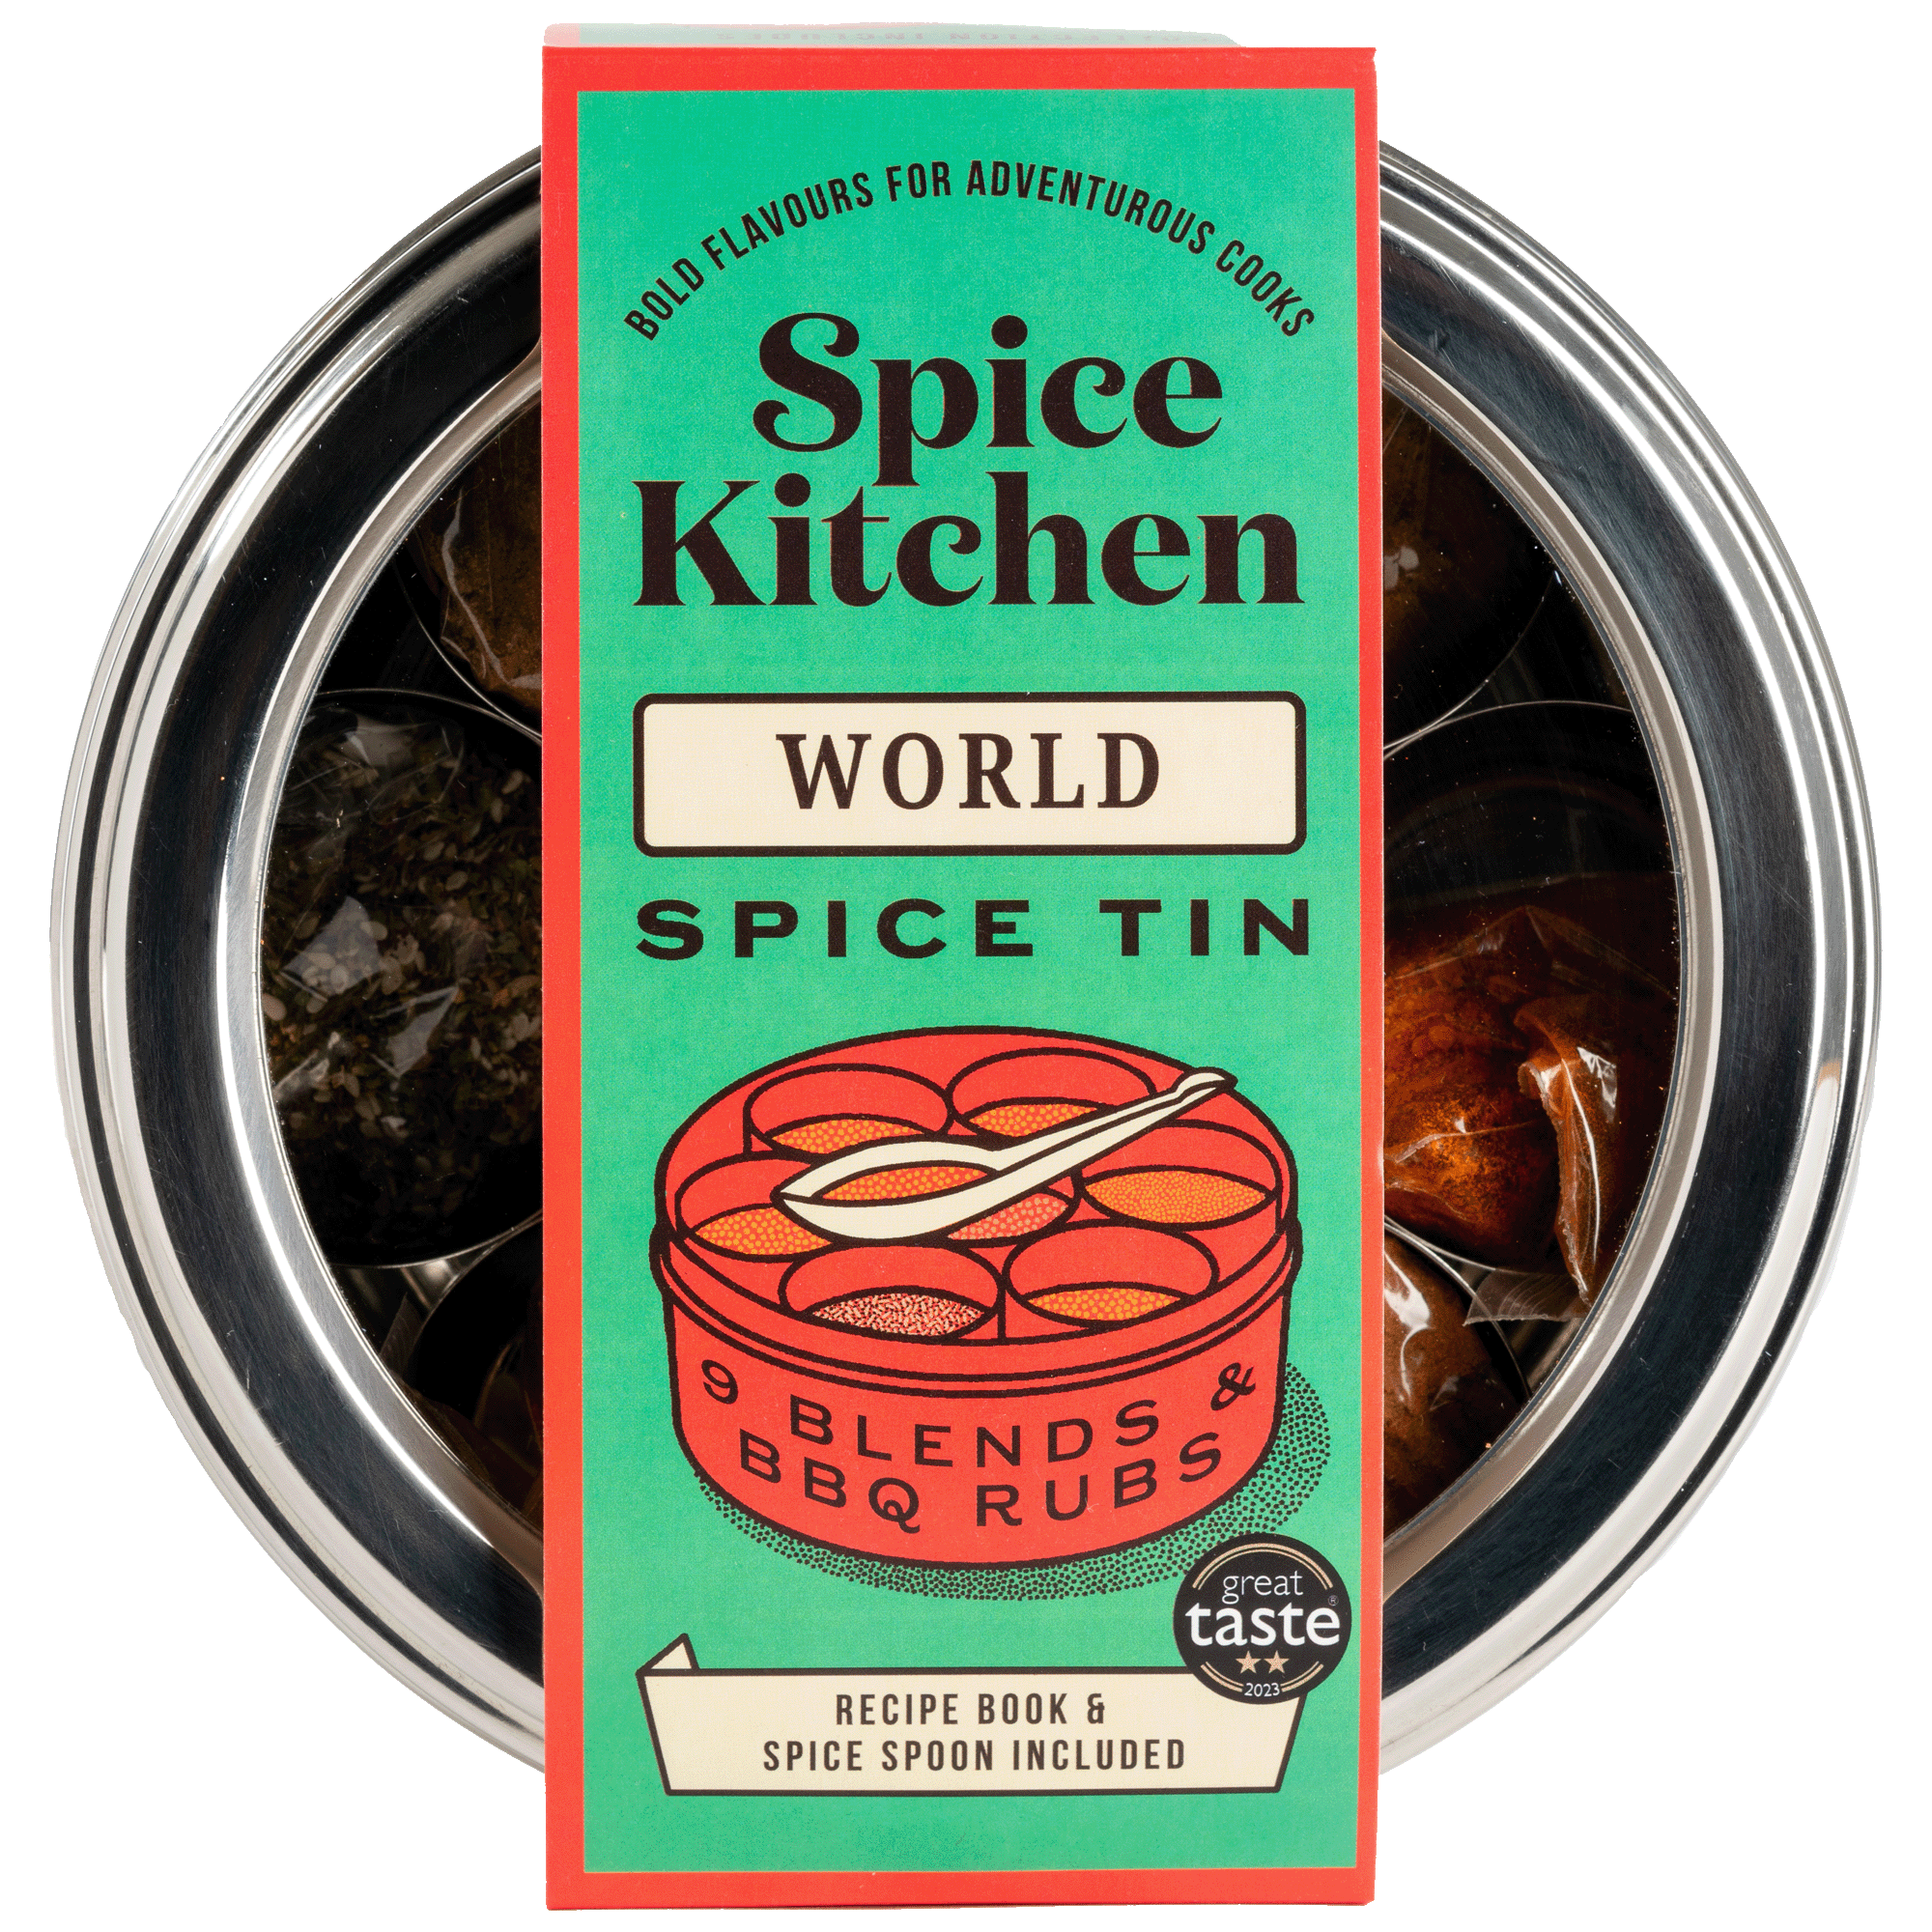 World Tin With 9 Blends &amp; Rubs - Unwrapped